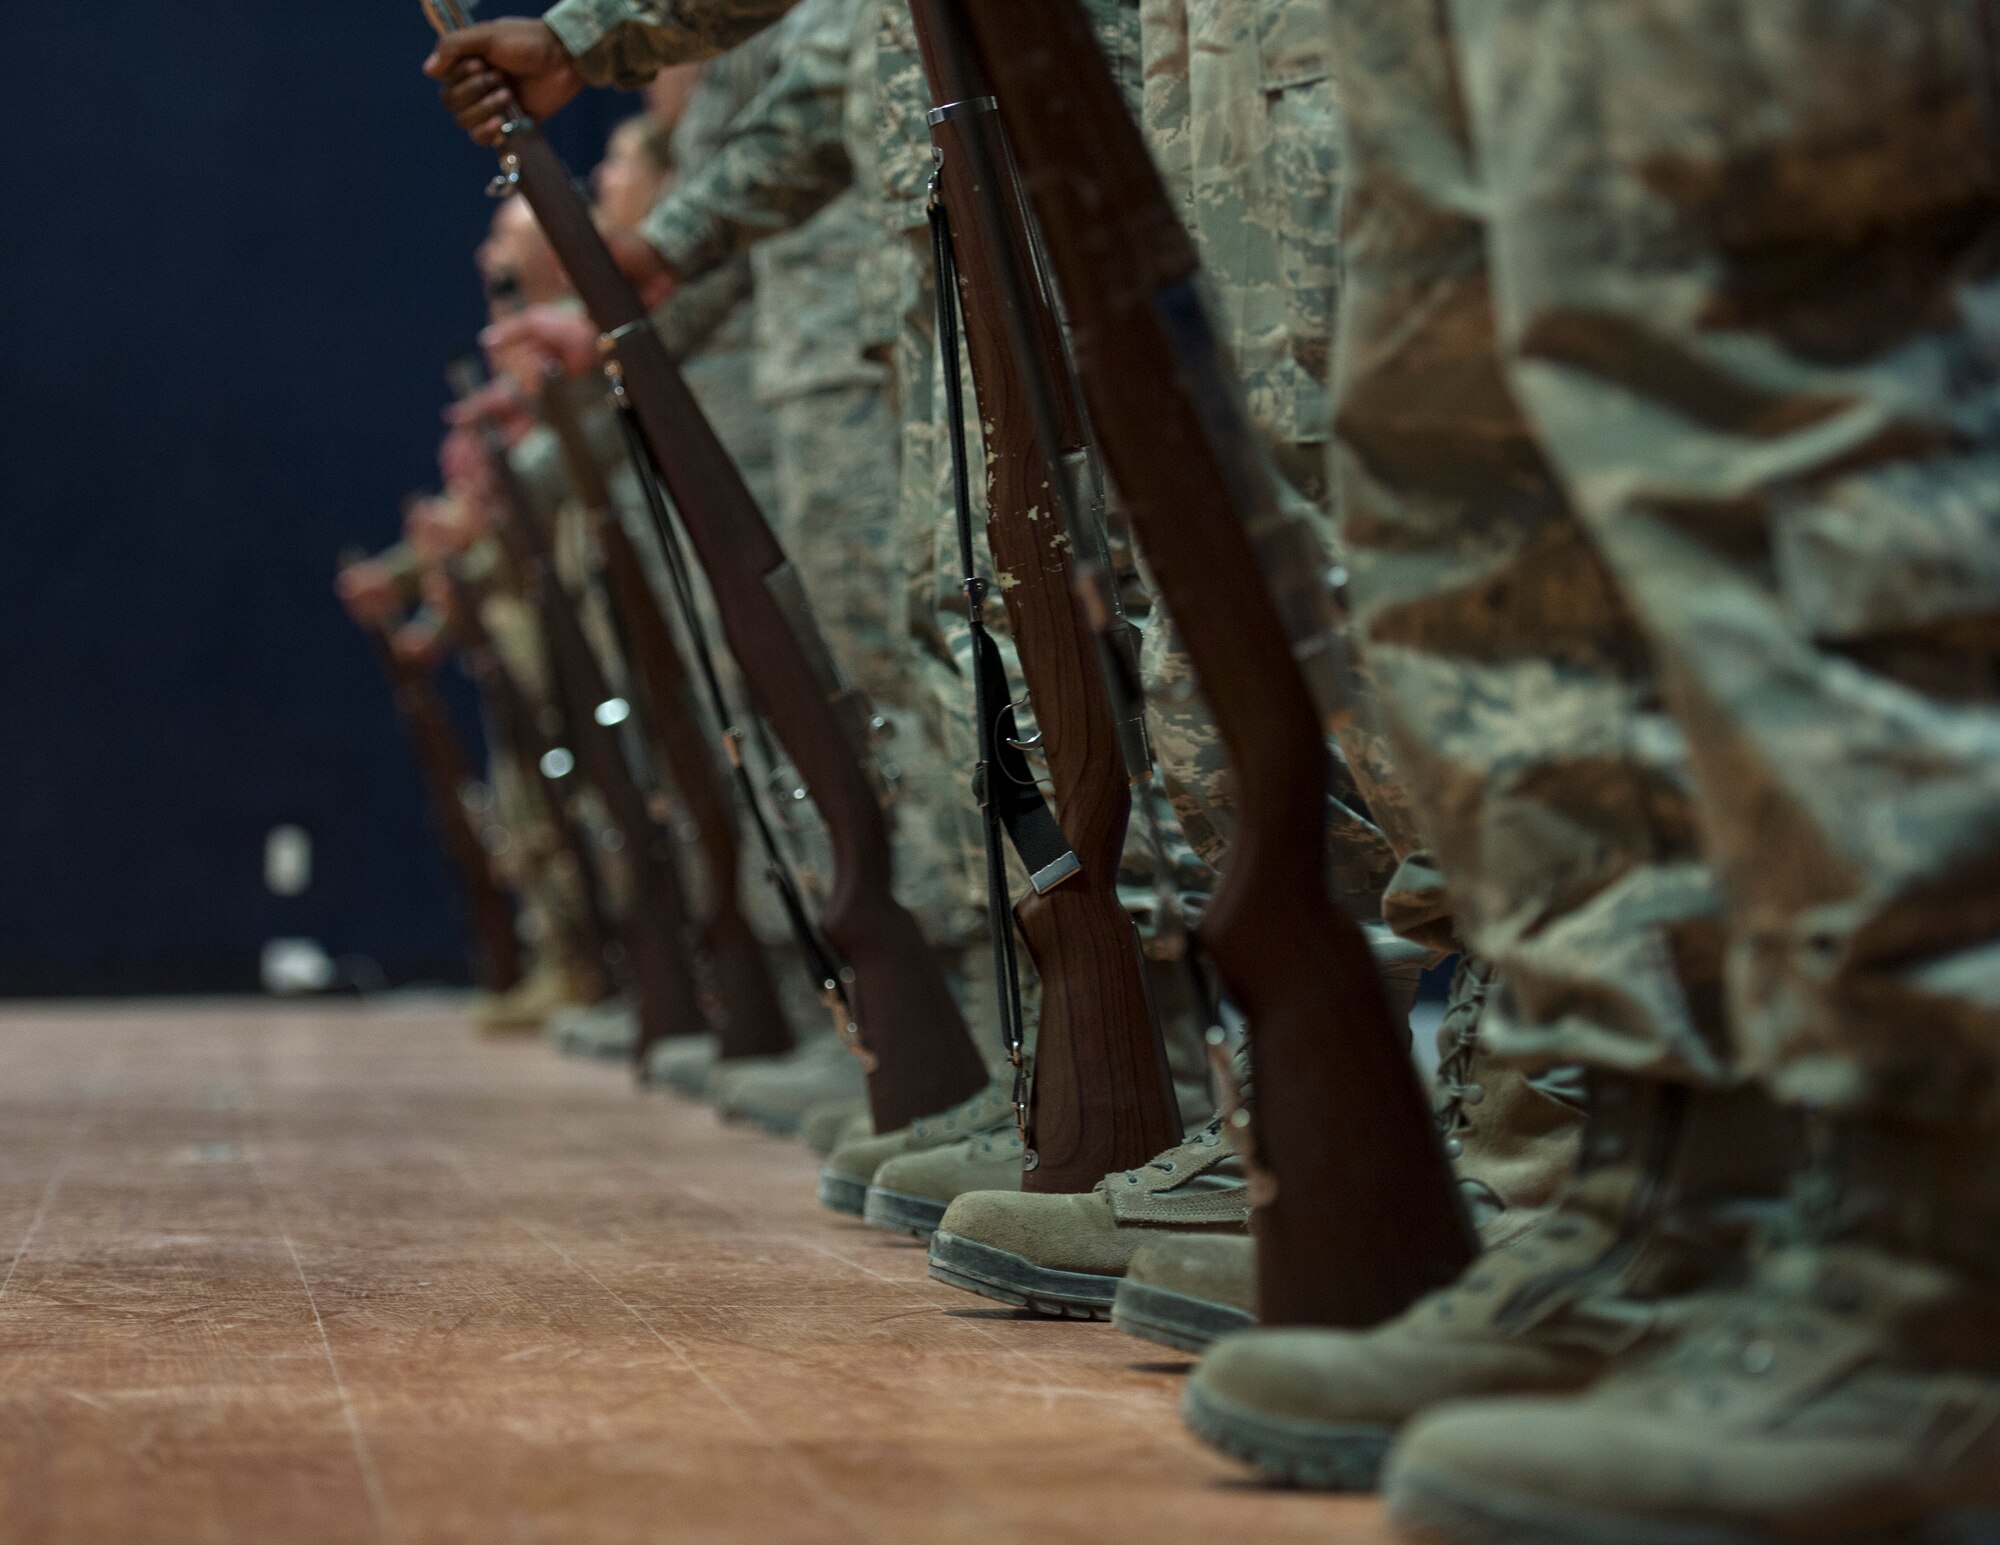 U.S. Air Force Airmen with the 379th Air Expeditionary Wing stand at parade rest with rifles at Al Udeid Air Base, Qatar, Aug. 9, 2017.